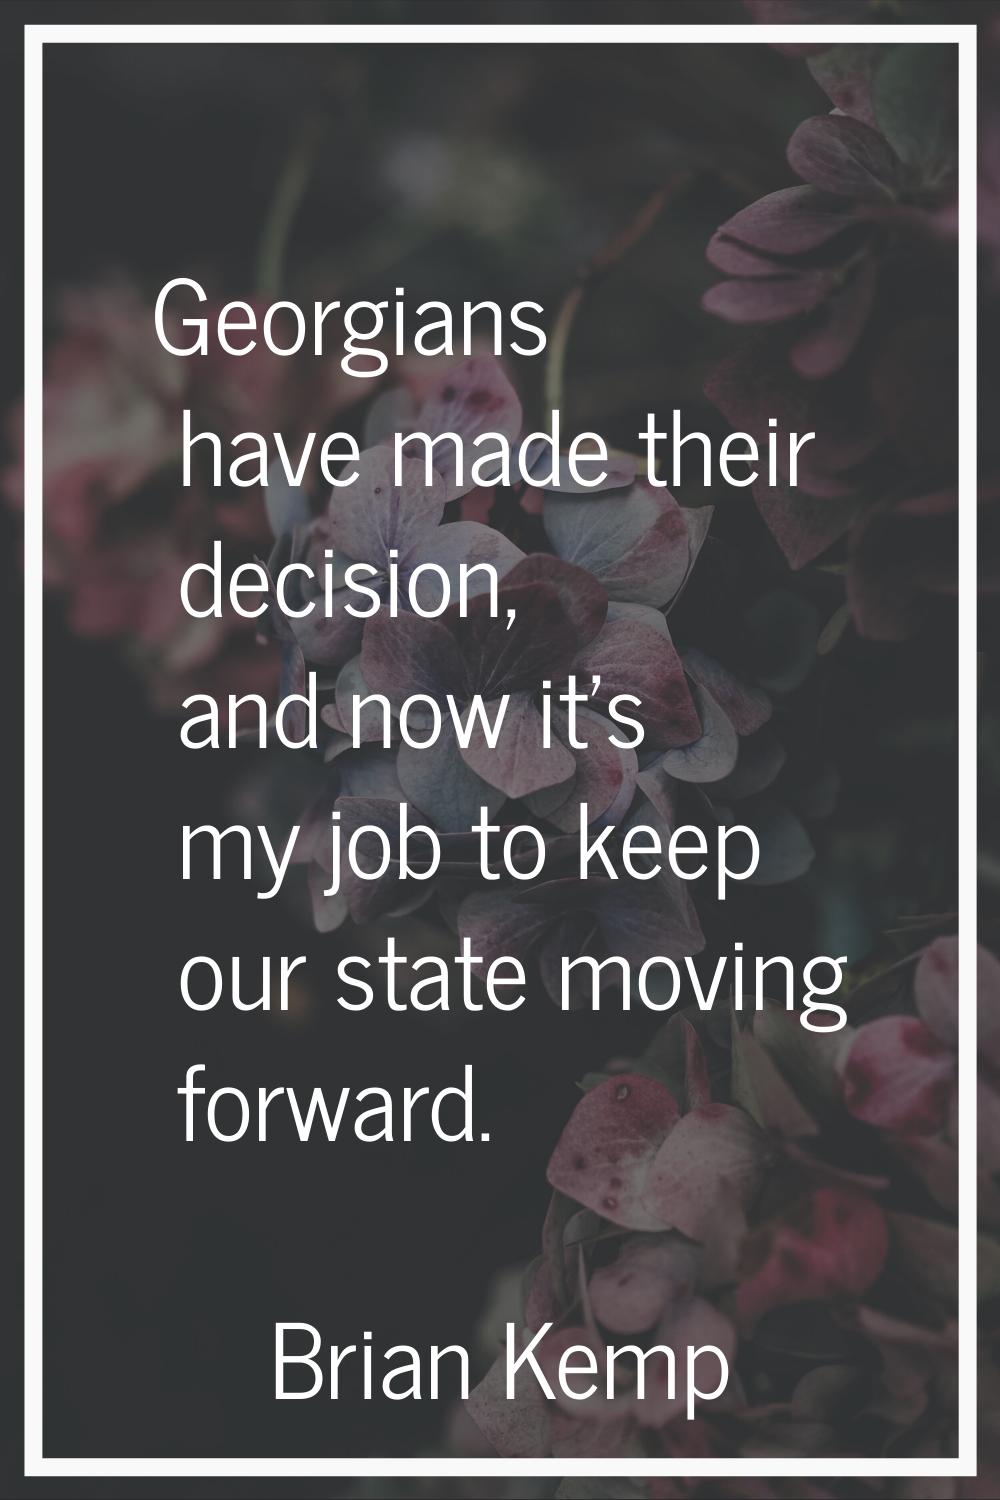 Georgians have made their decision, and now it's my job to keep our state moving forward.